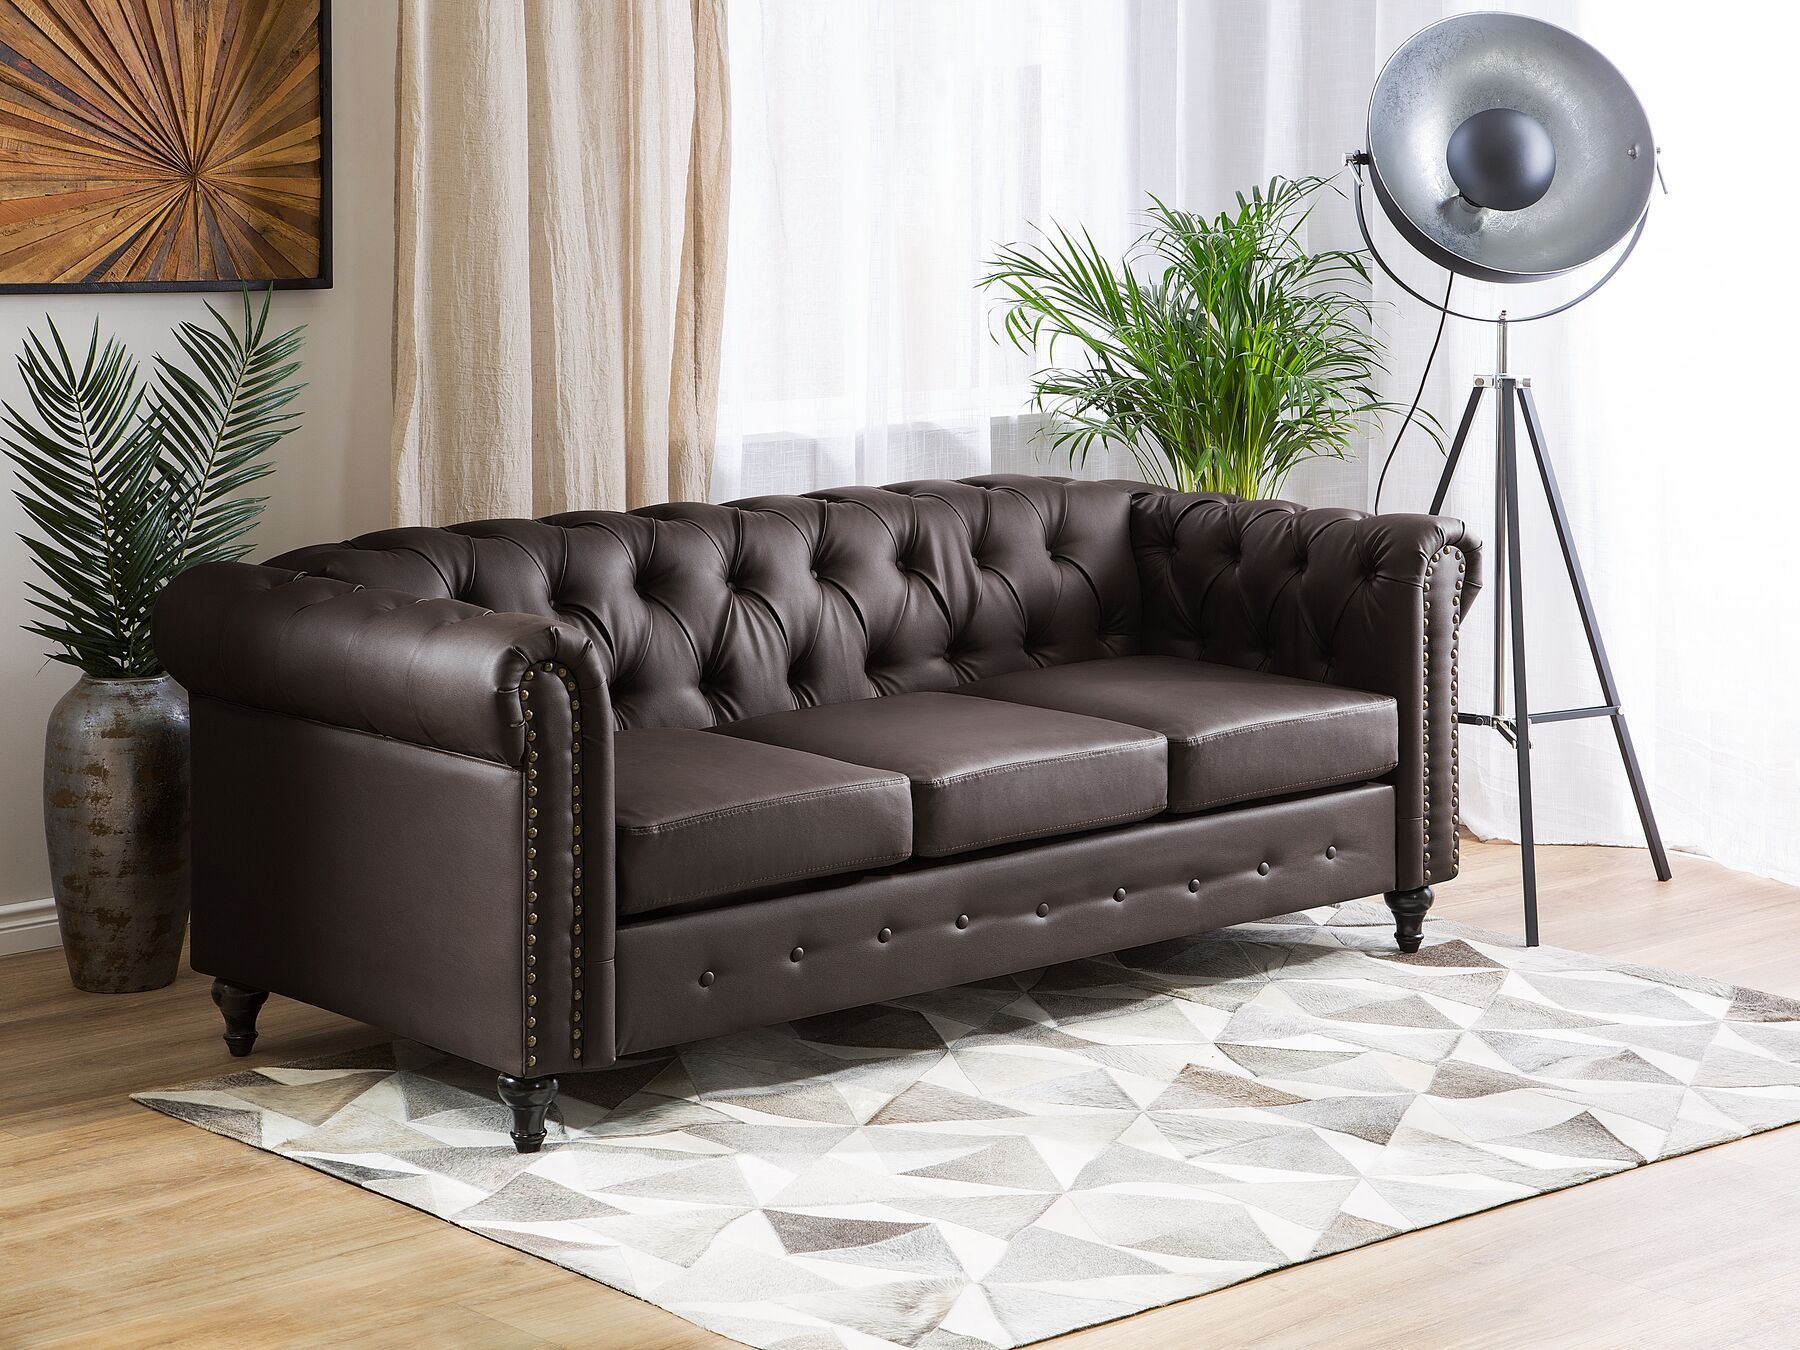 3 Seater Faux Leather Sofa Brown Chesterfield | Beliani.pl Inside Traditional 3 Seater Faux Leather Sofas (Gallery 7 of 20)